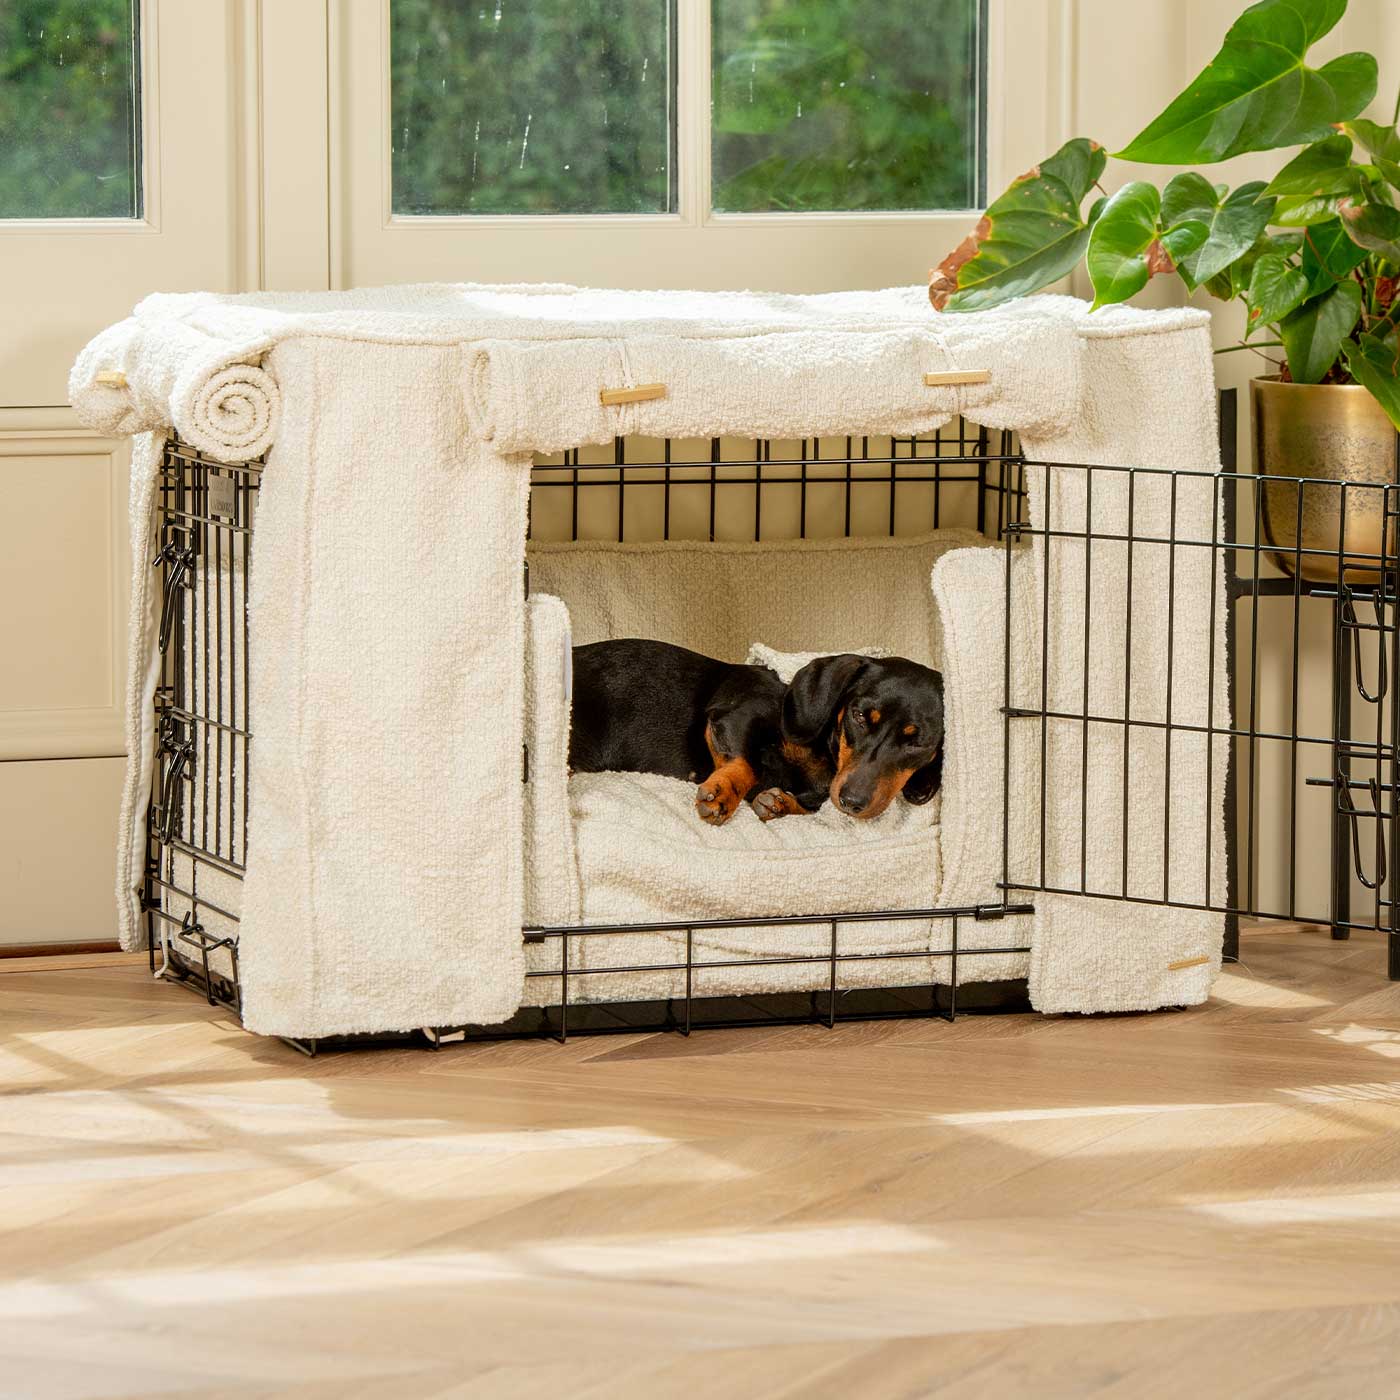 [color:black] Luxury Heavy Duty Dog Cage, In Stunning Ivory Bouclé Cage Set, The Perfect Dog Cage Set For Building The Ultimate Pet Den! Dog Cage Cover Available To Personalize at Lords & Labradors US